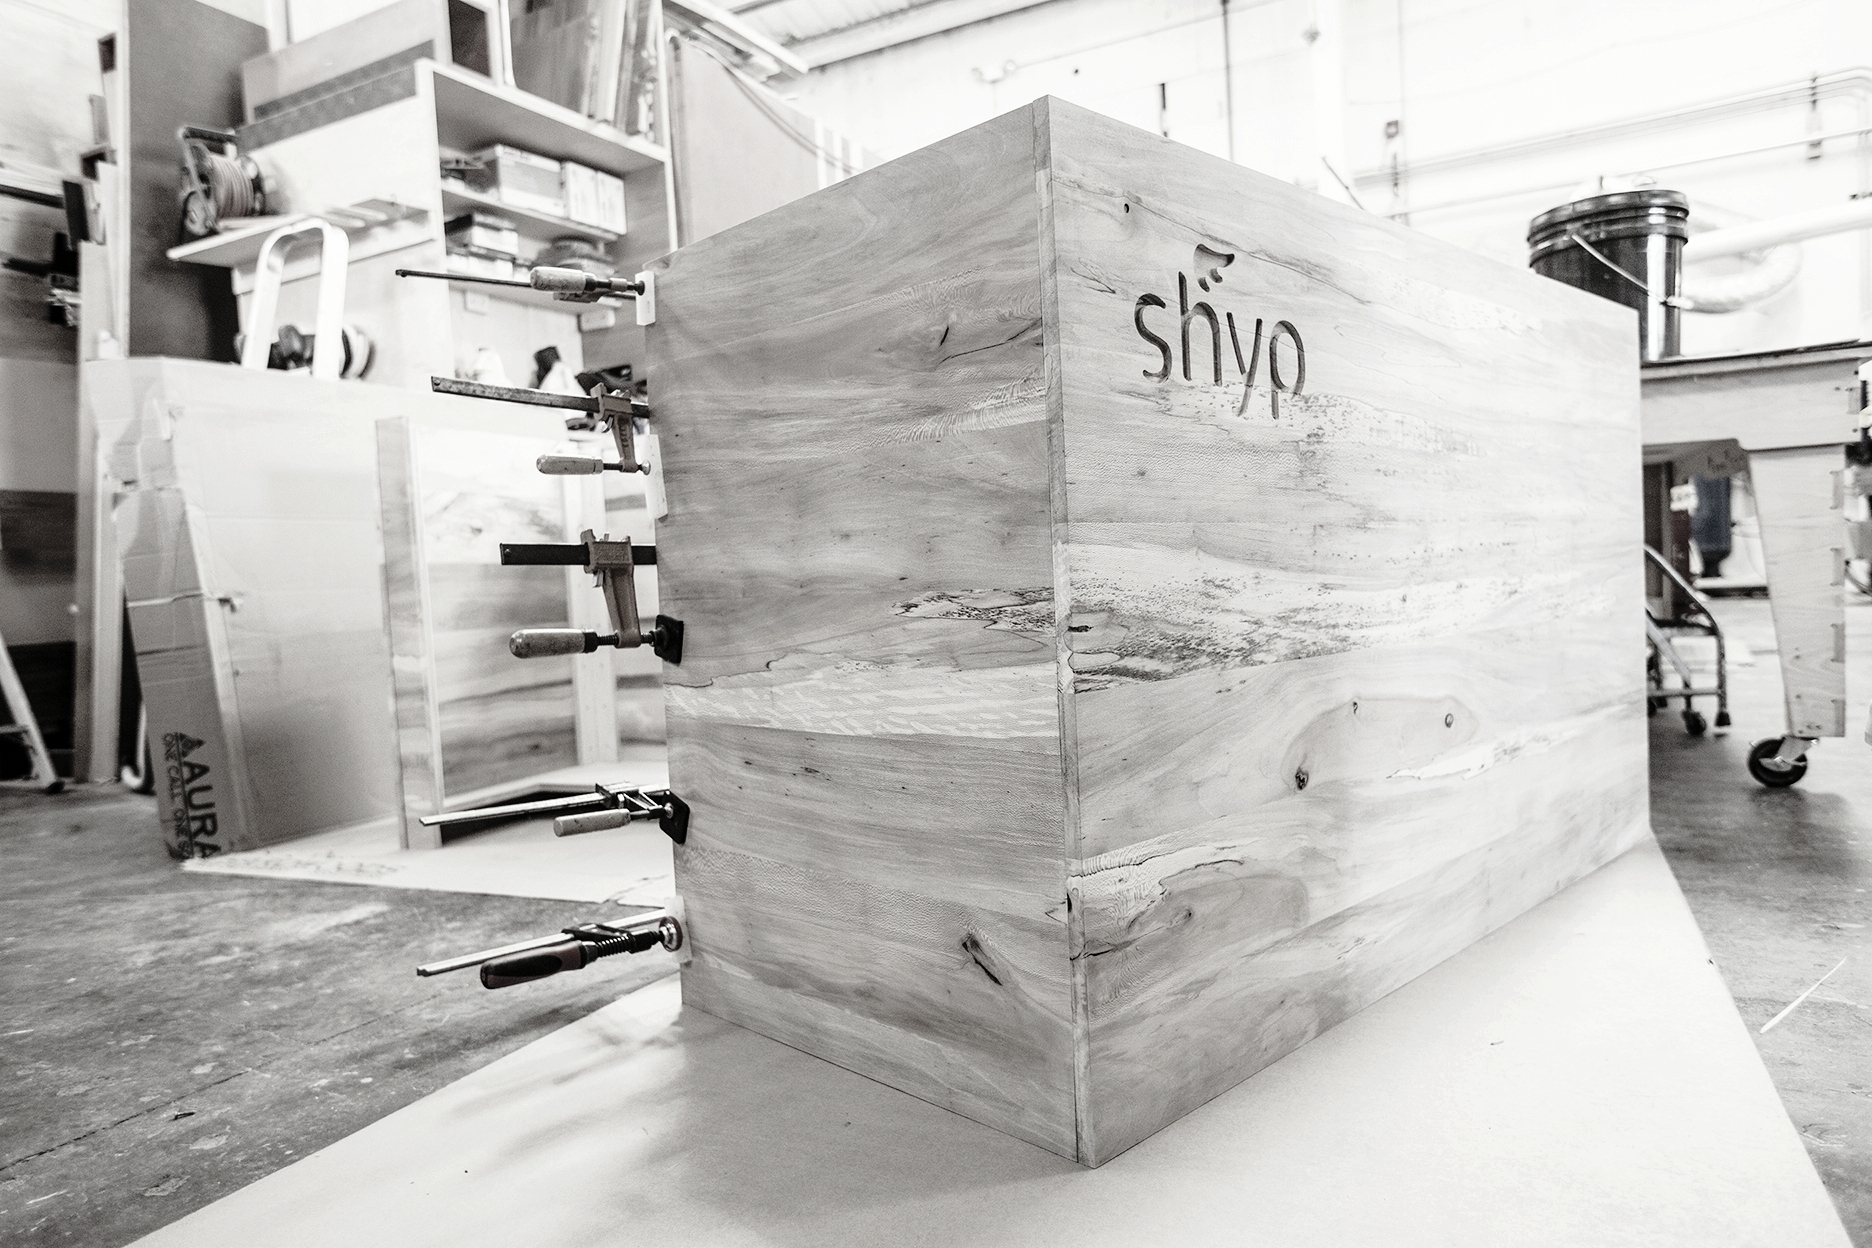  Our fabrication shop is tuned perfectly to realize our designs, mixing CNC joinery and traditional craftsmanship. 